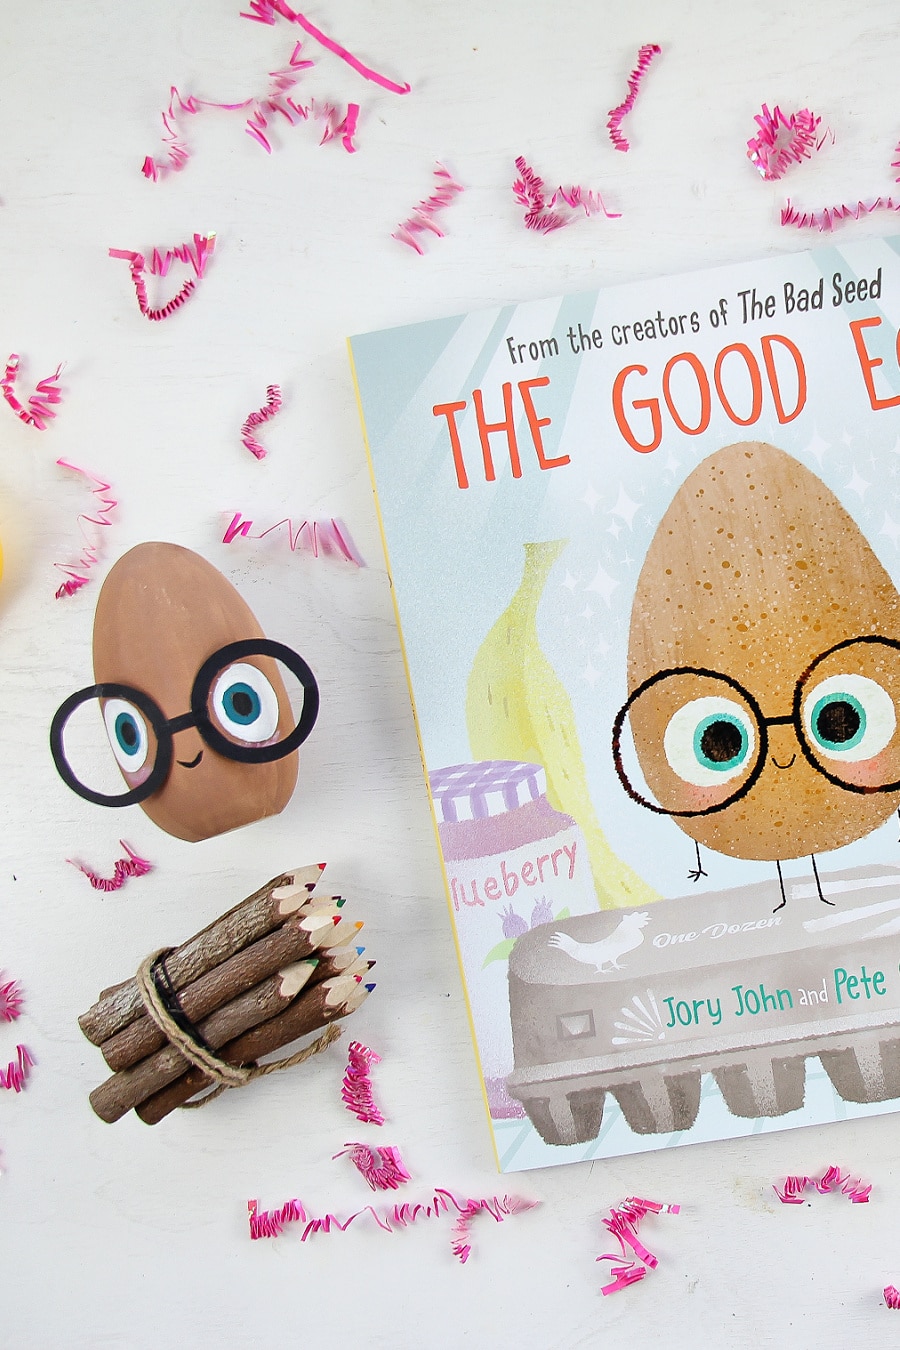 A wood egg decorated with eyes and glasses inspired by The Good Egg book for children.